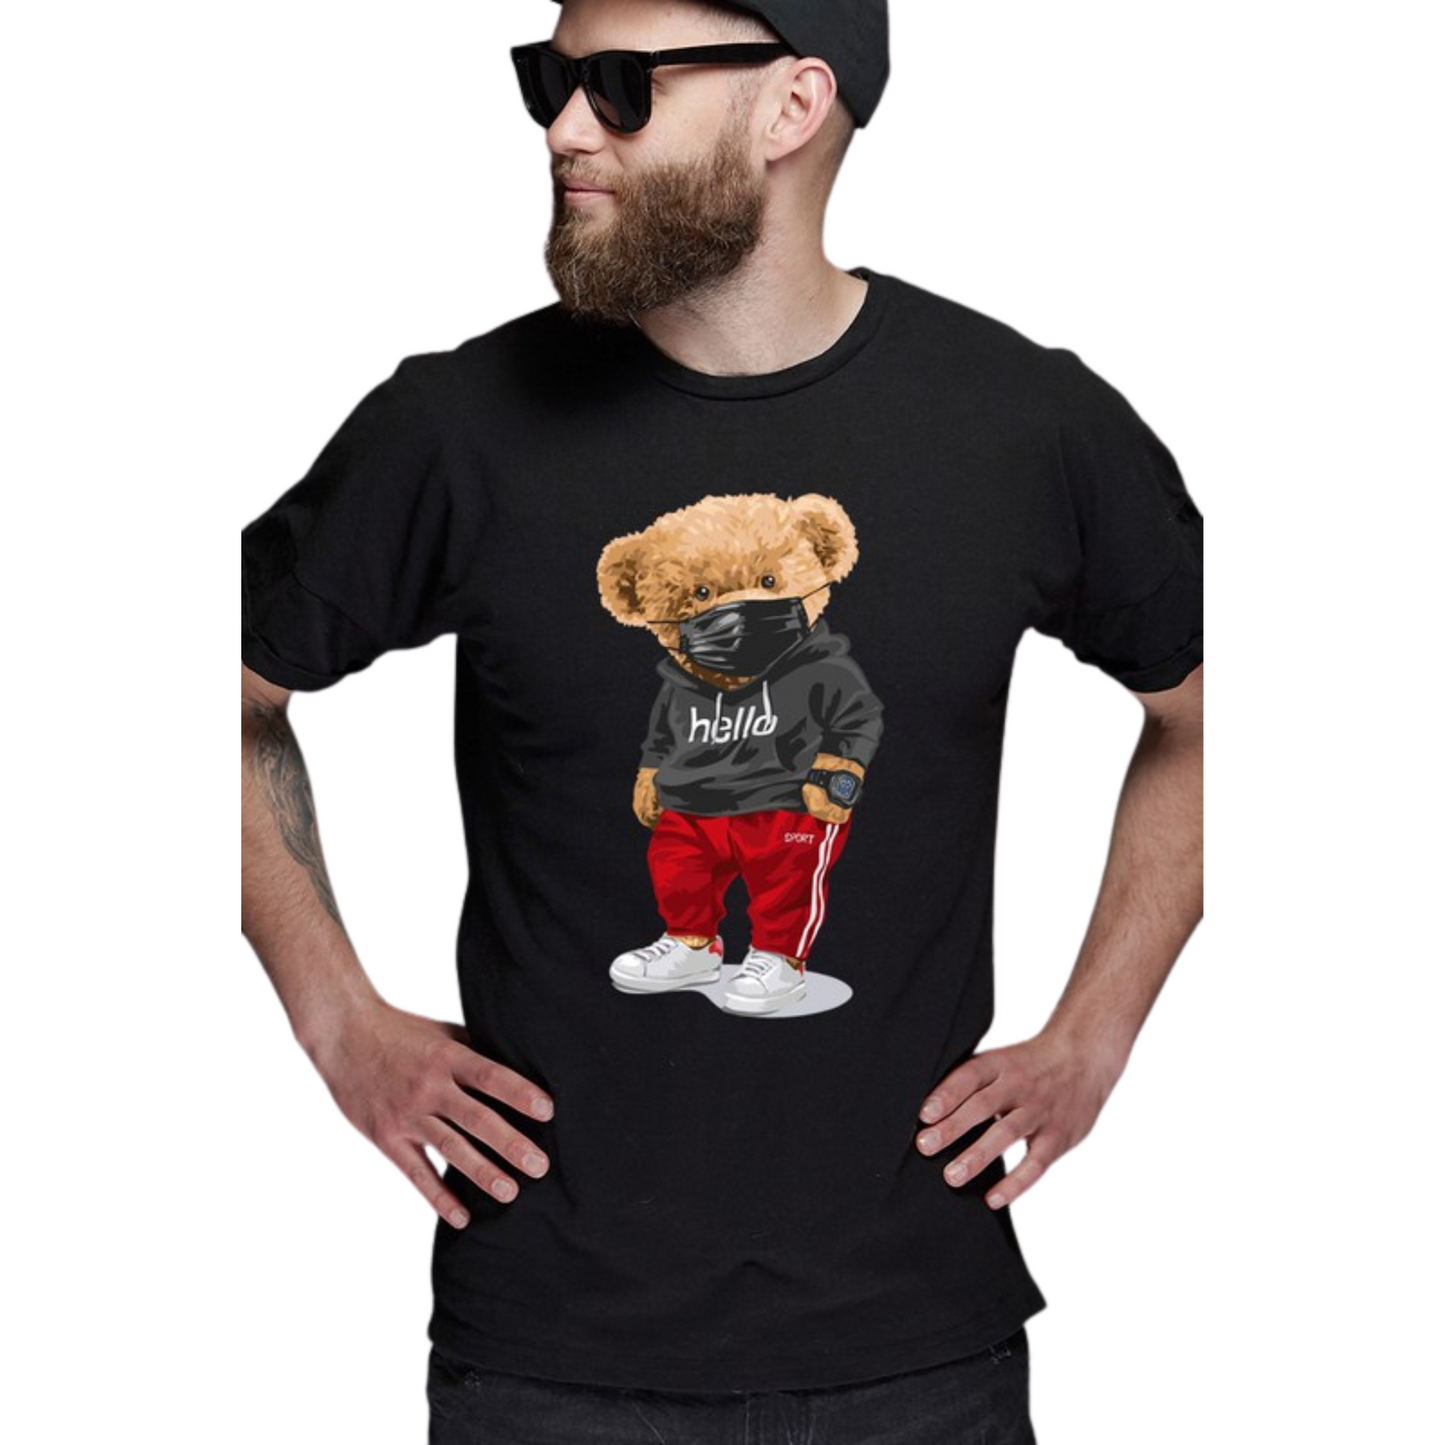 No Brand Masked Bear Graphic Tee (S-XL)